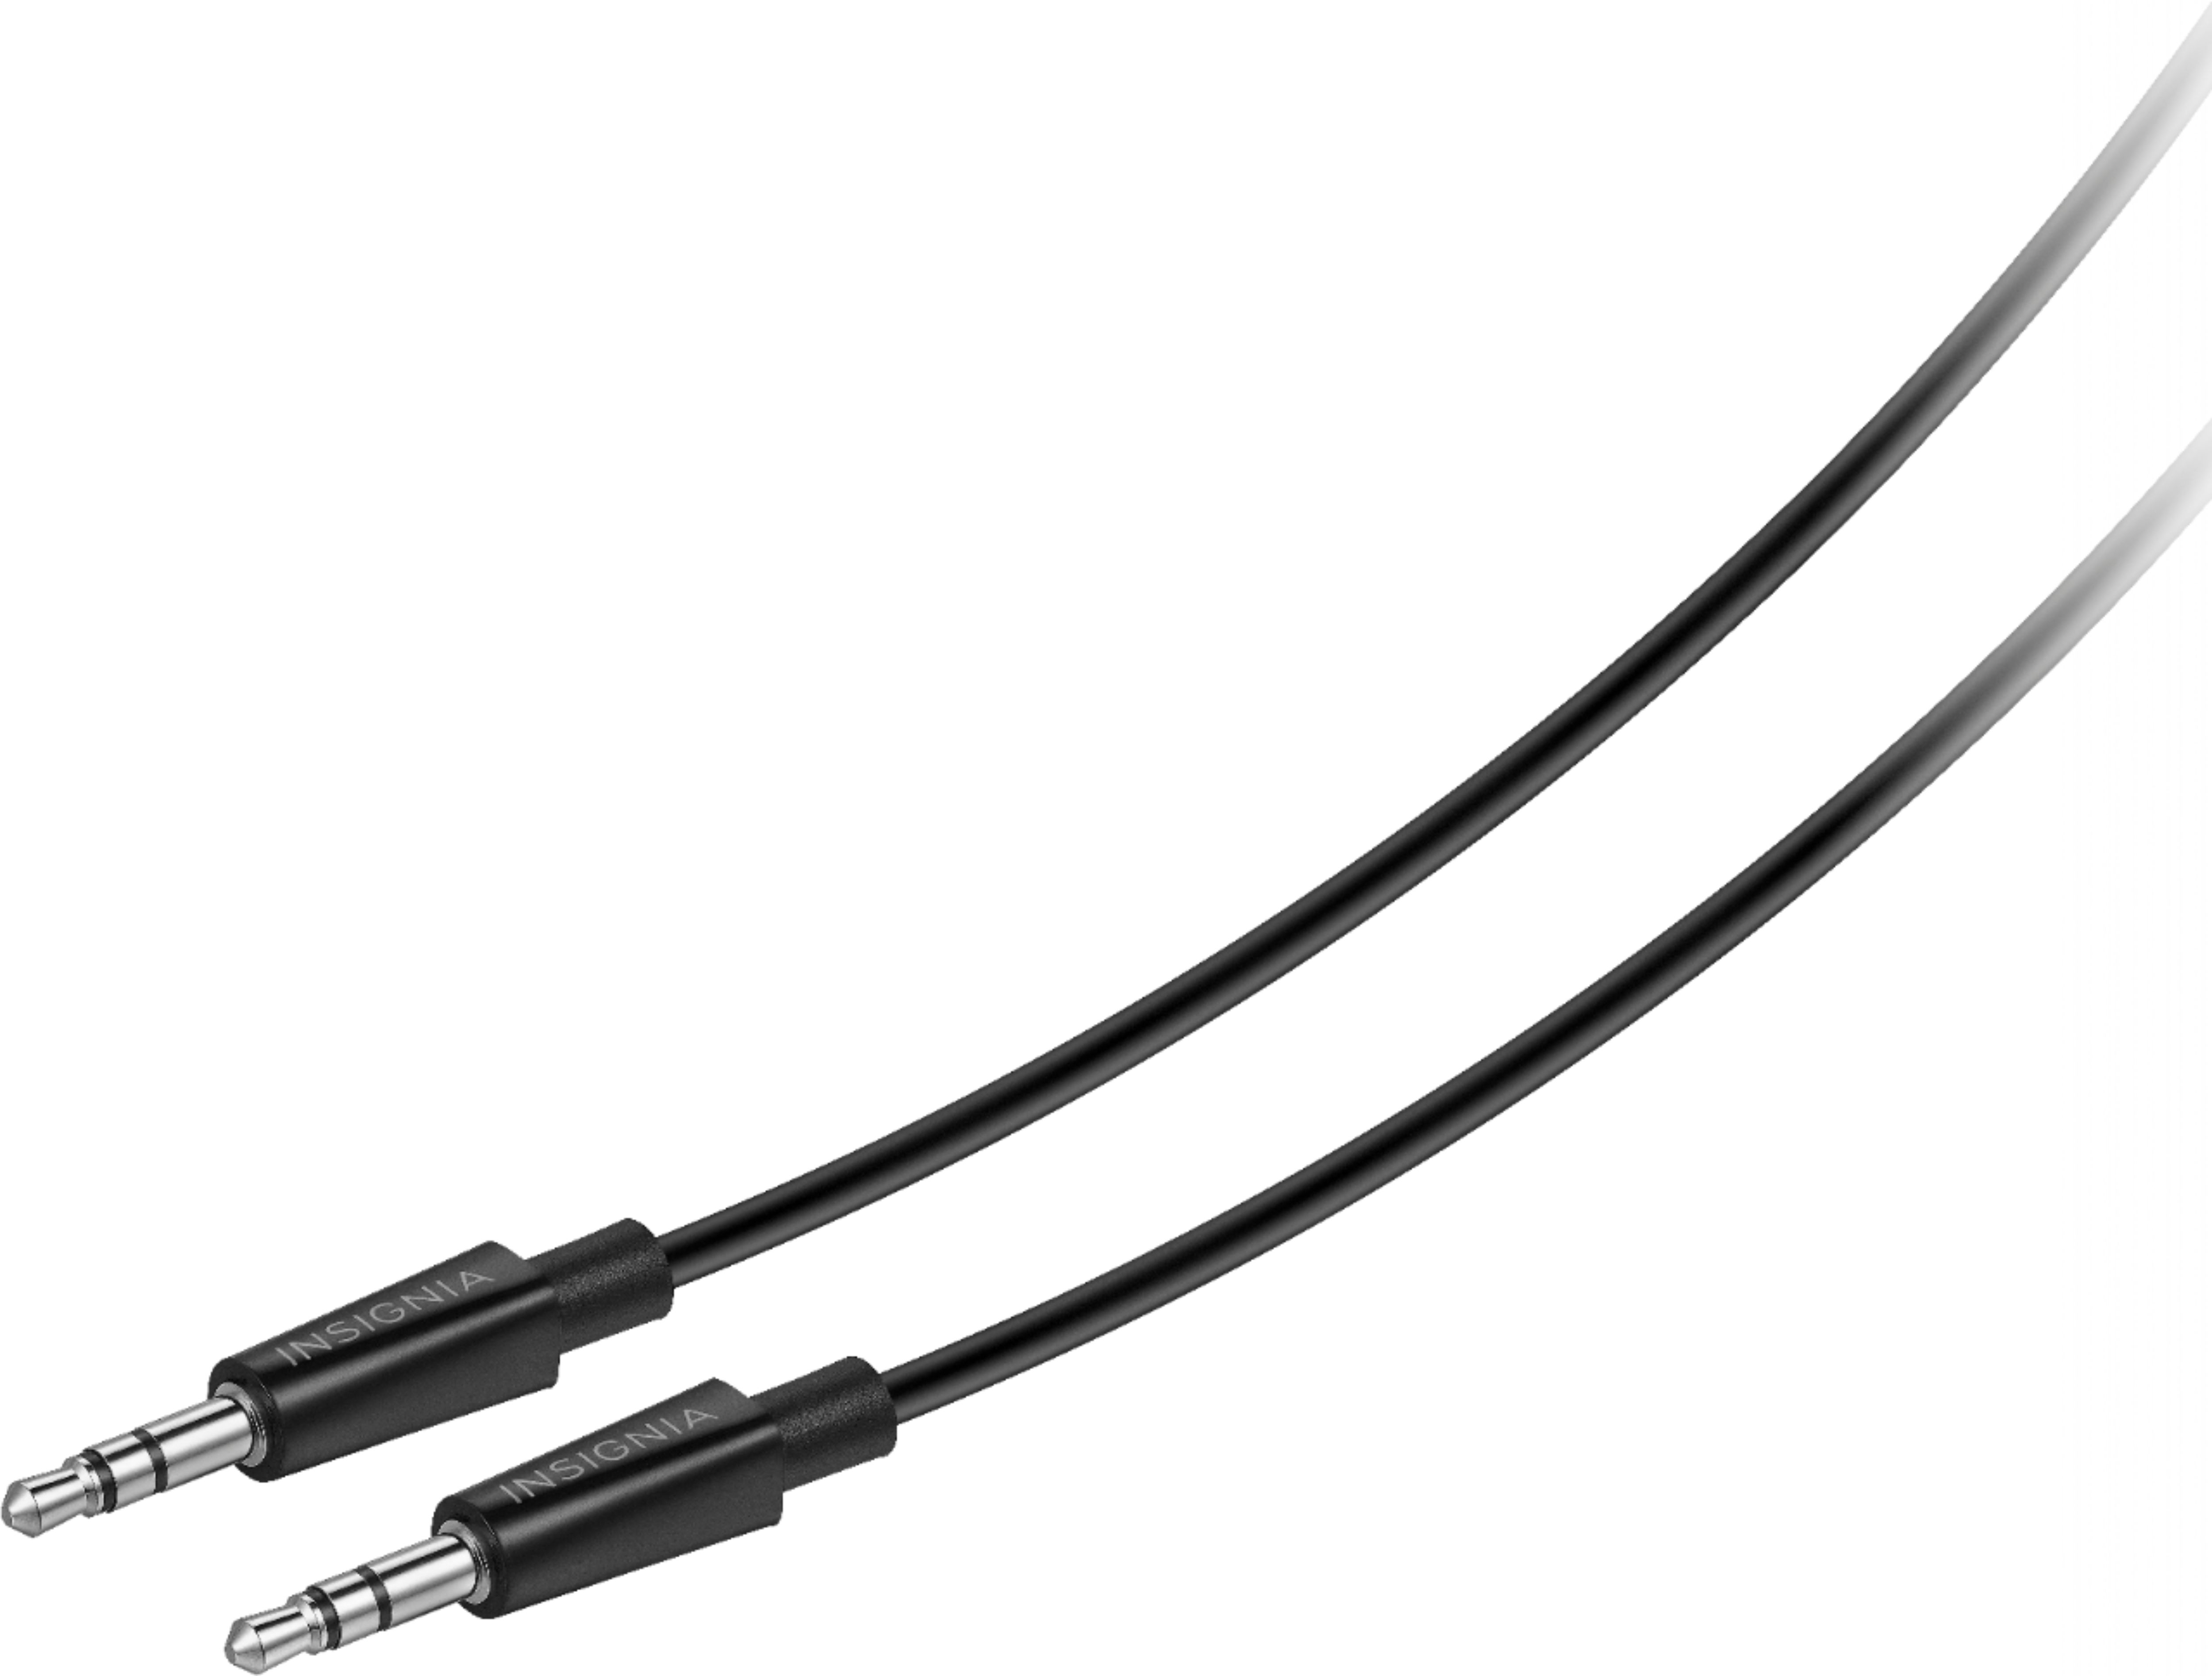 Insignia™ 10' 3.5mm Audio Cable Black NS-LW64 - Best Buy